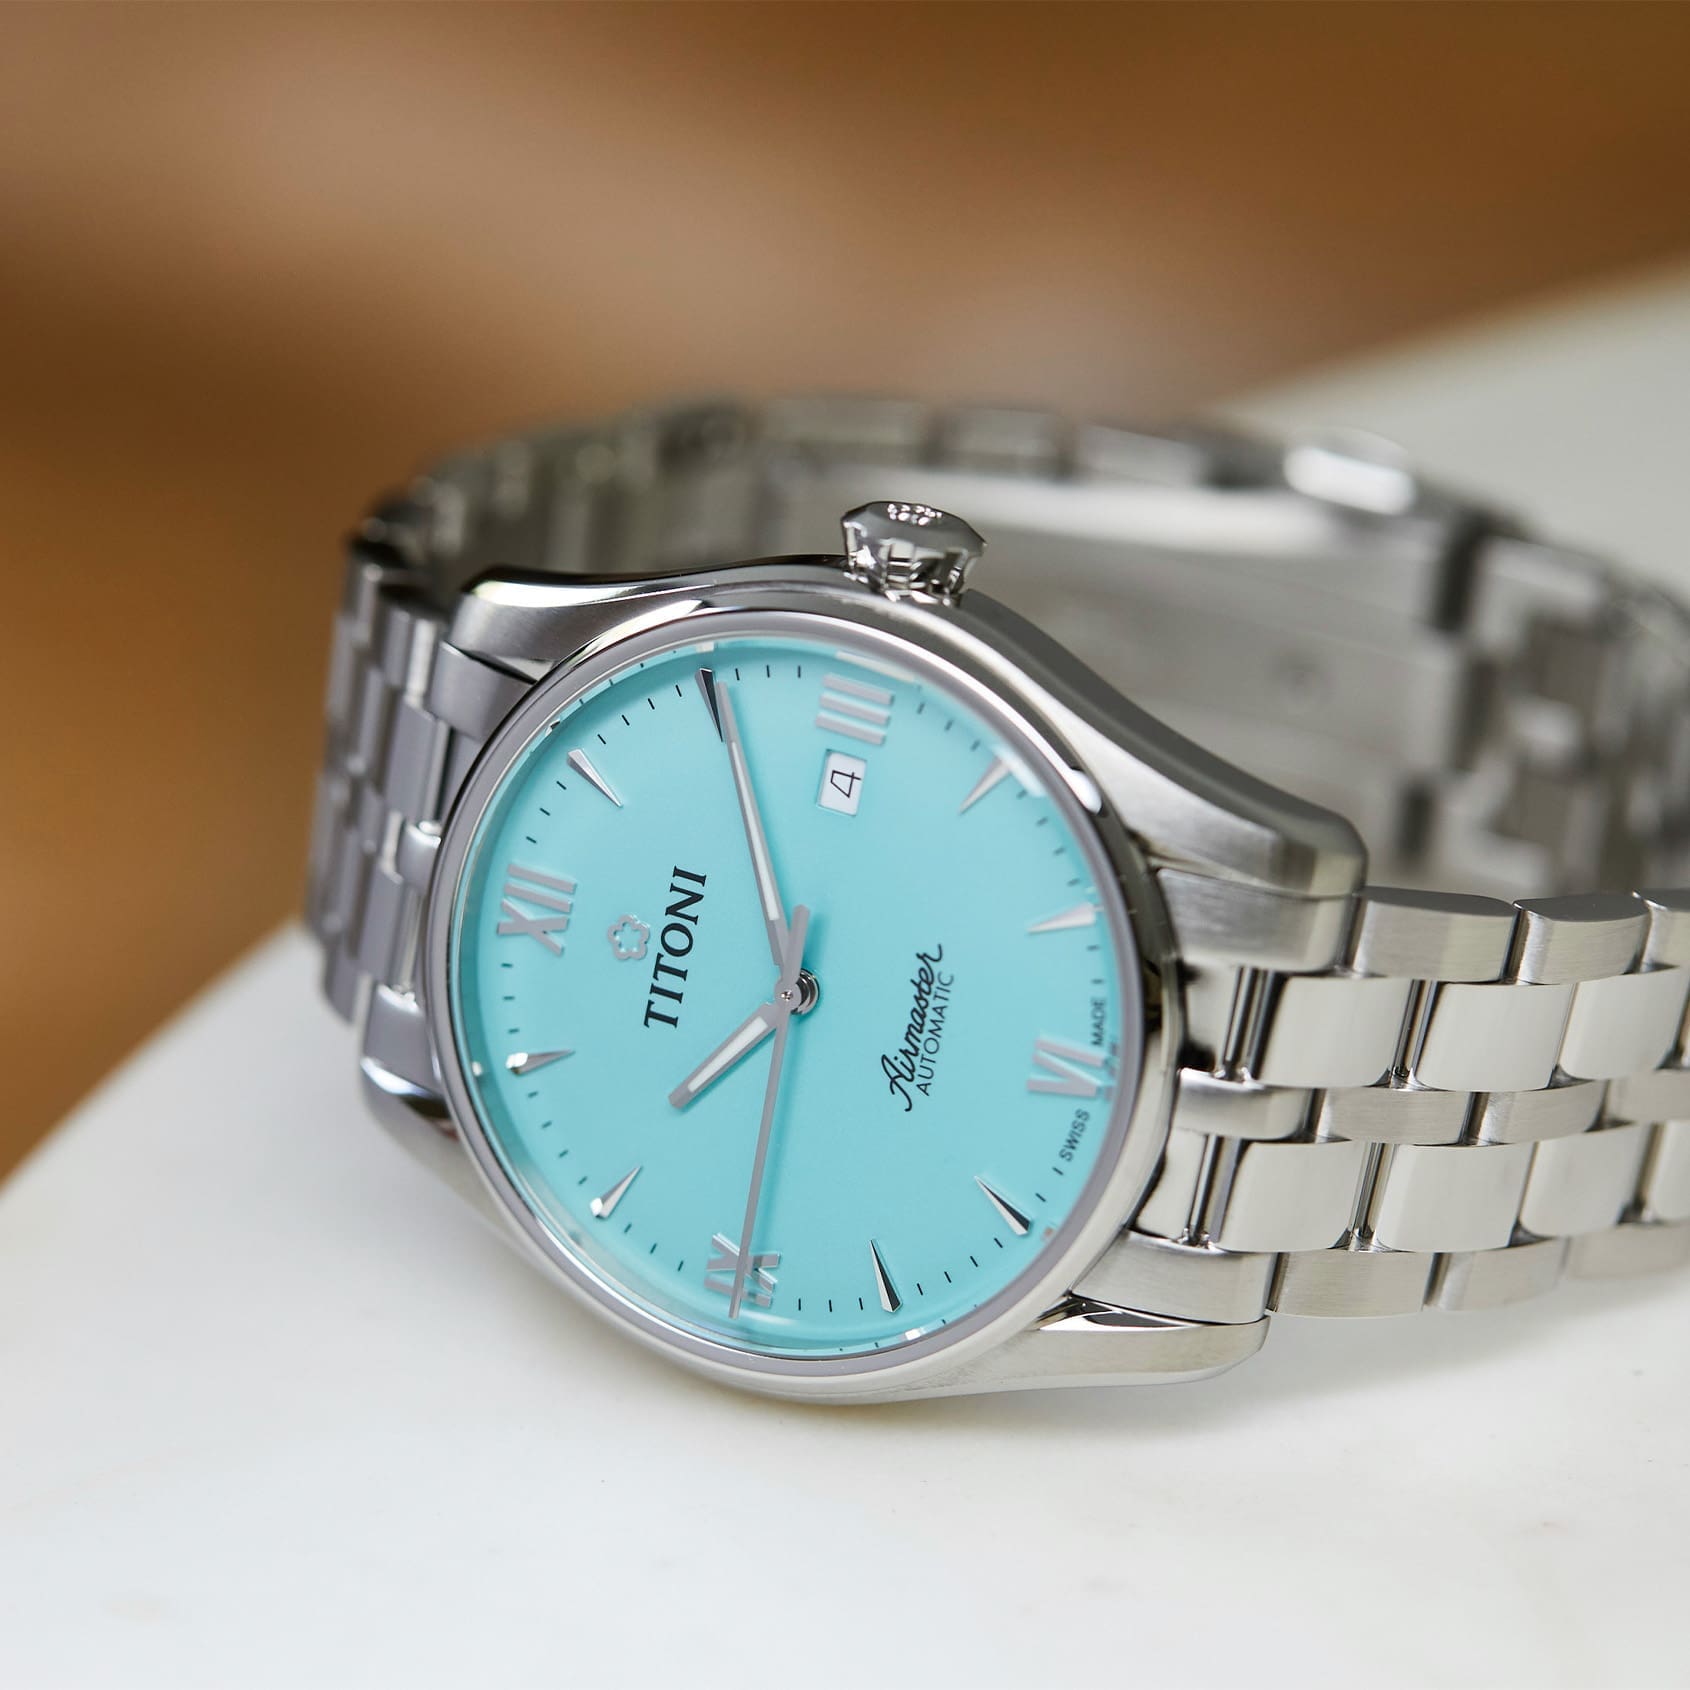 HANDS-ON: The Titoni Airmaster delivers classic vibes and a dial in ‘glacier turquoise’